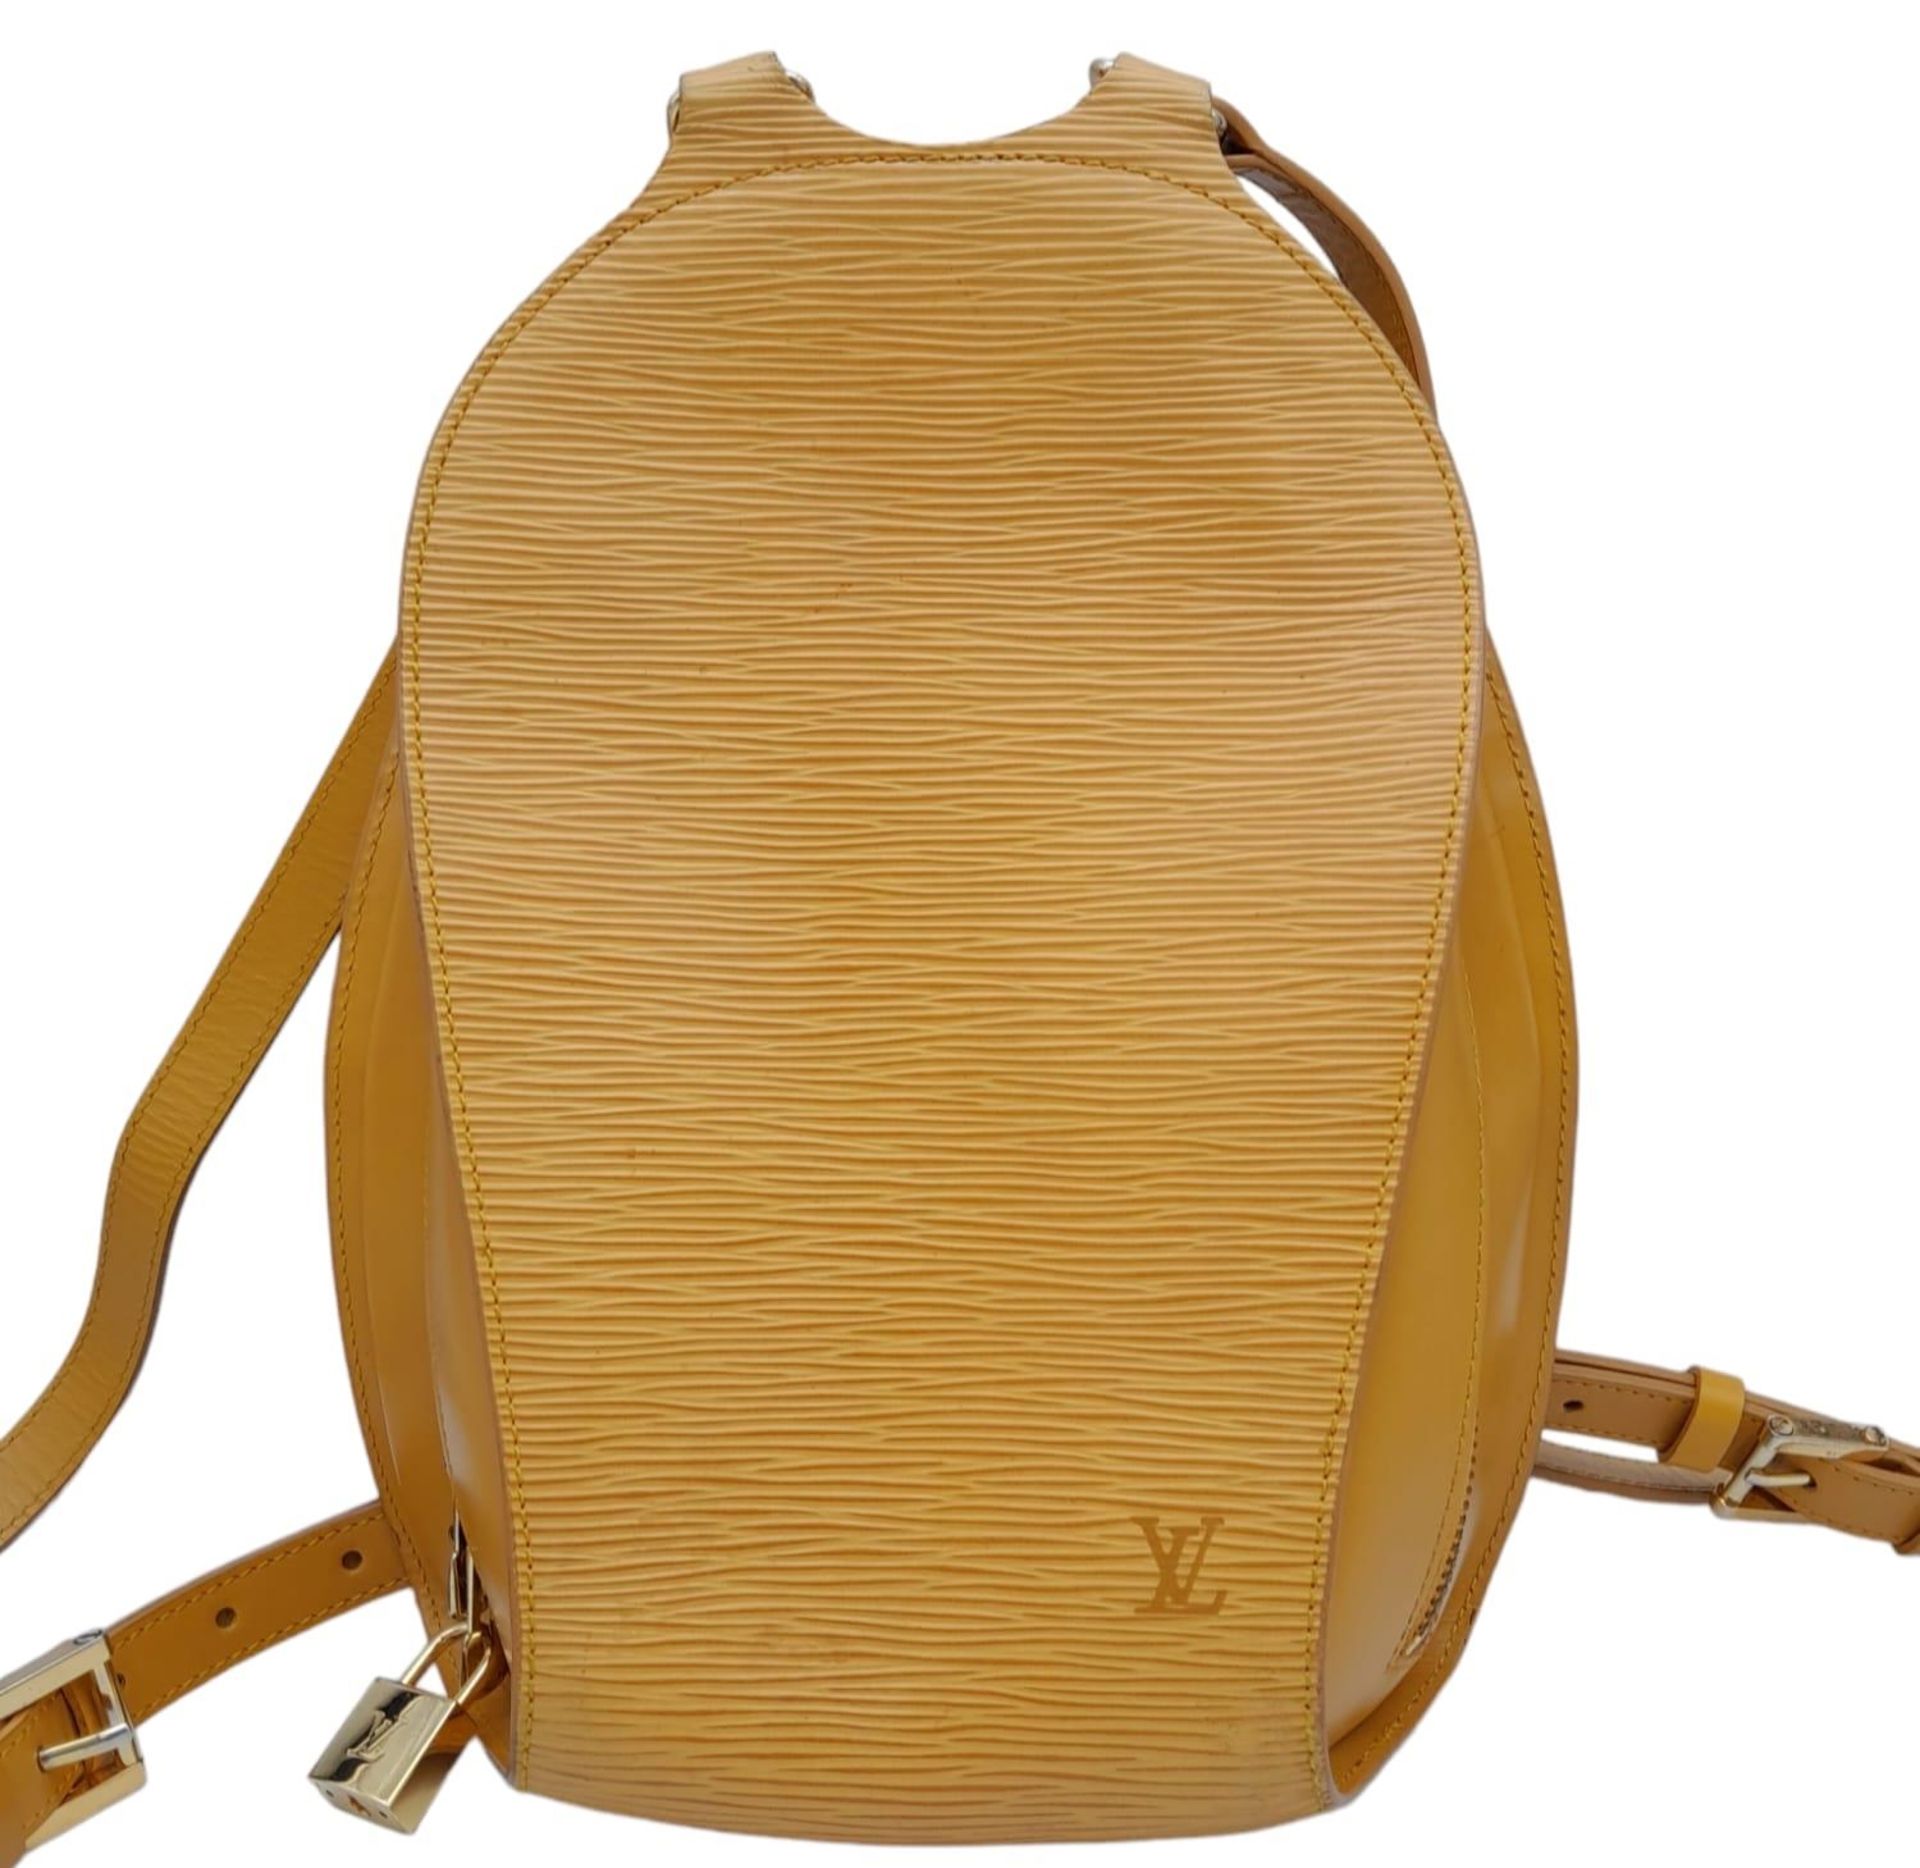 A Louis Vuitton Yellow 'Mabillon' Backpack. Epi leather exterior with gold-toned hardware, the - Image 2 of 9